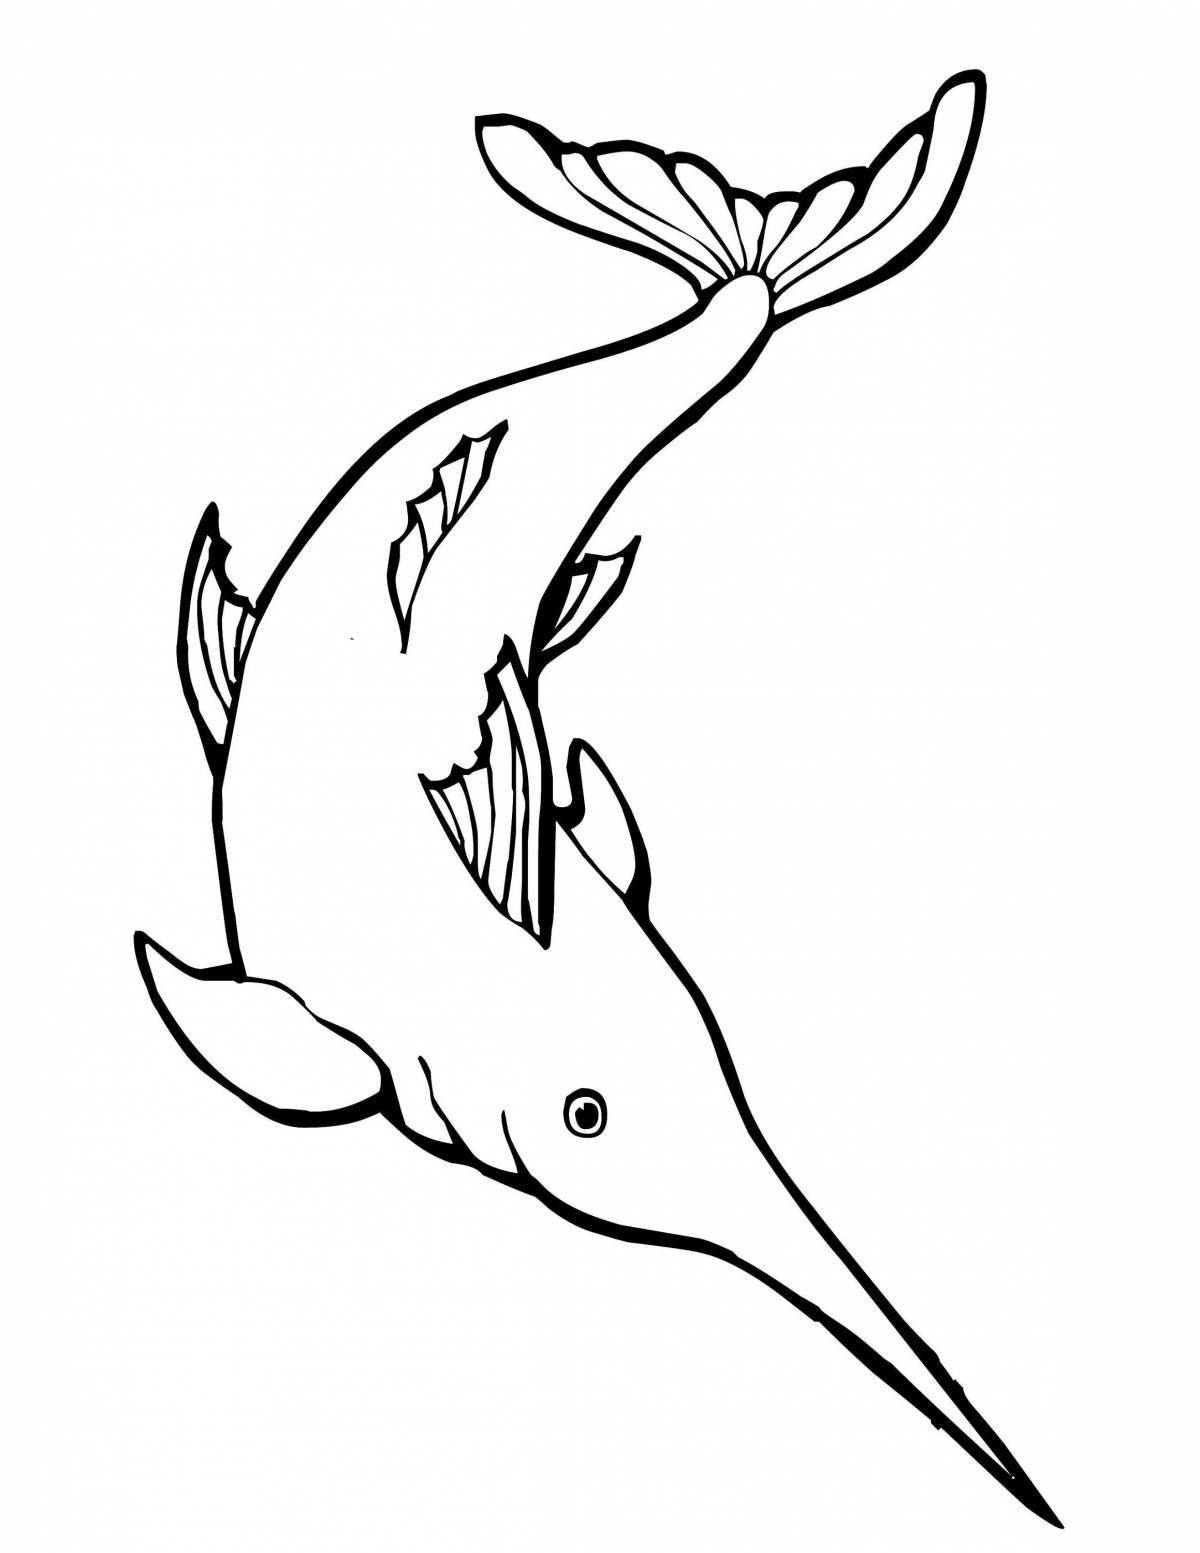 Outstanding fish sword coloring page for kids